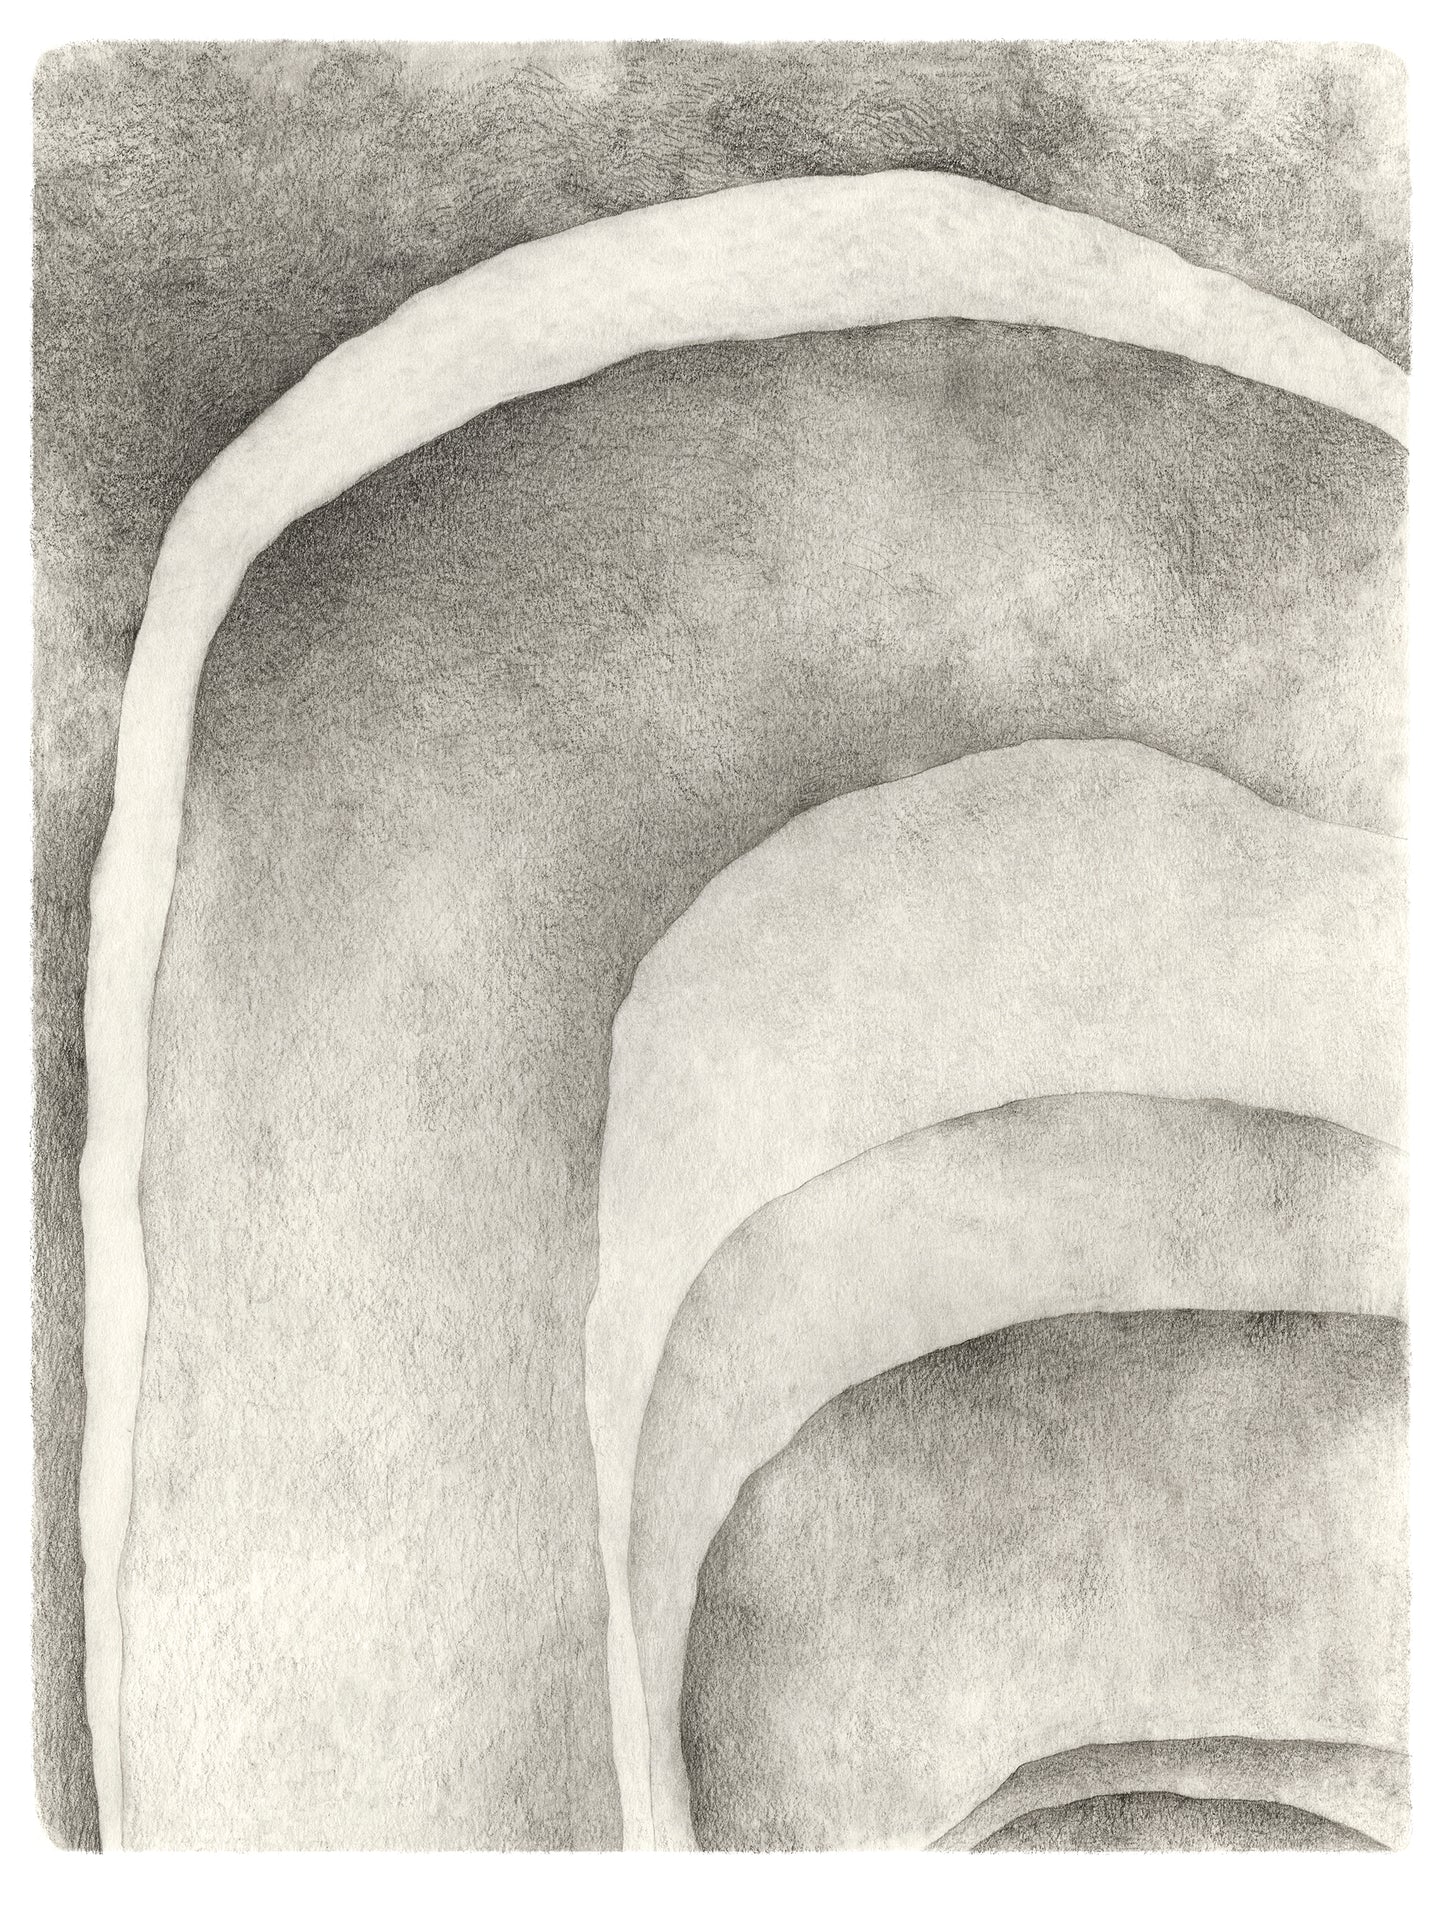 Abstract graphite drawing of shaded curved shapes.